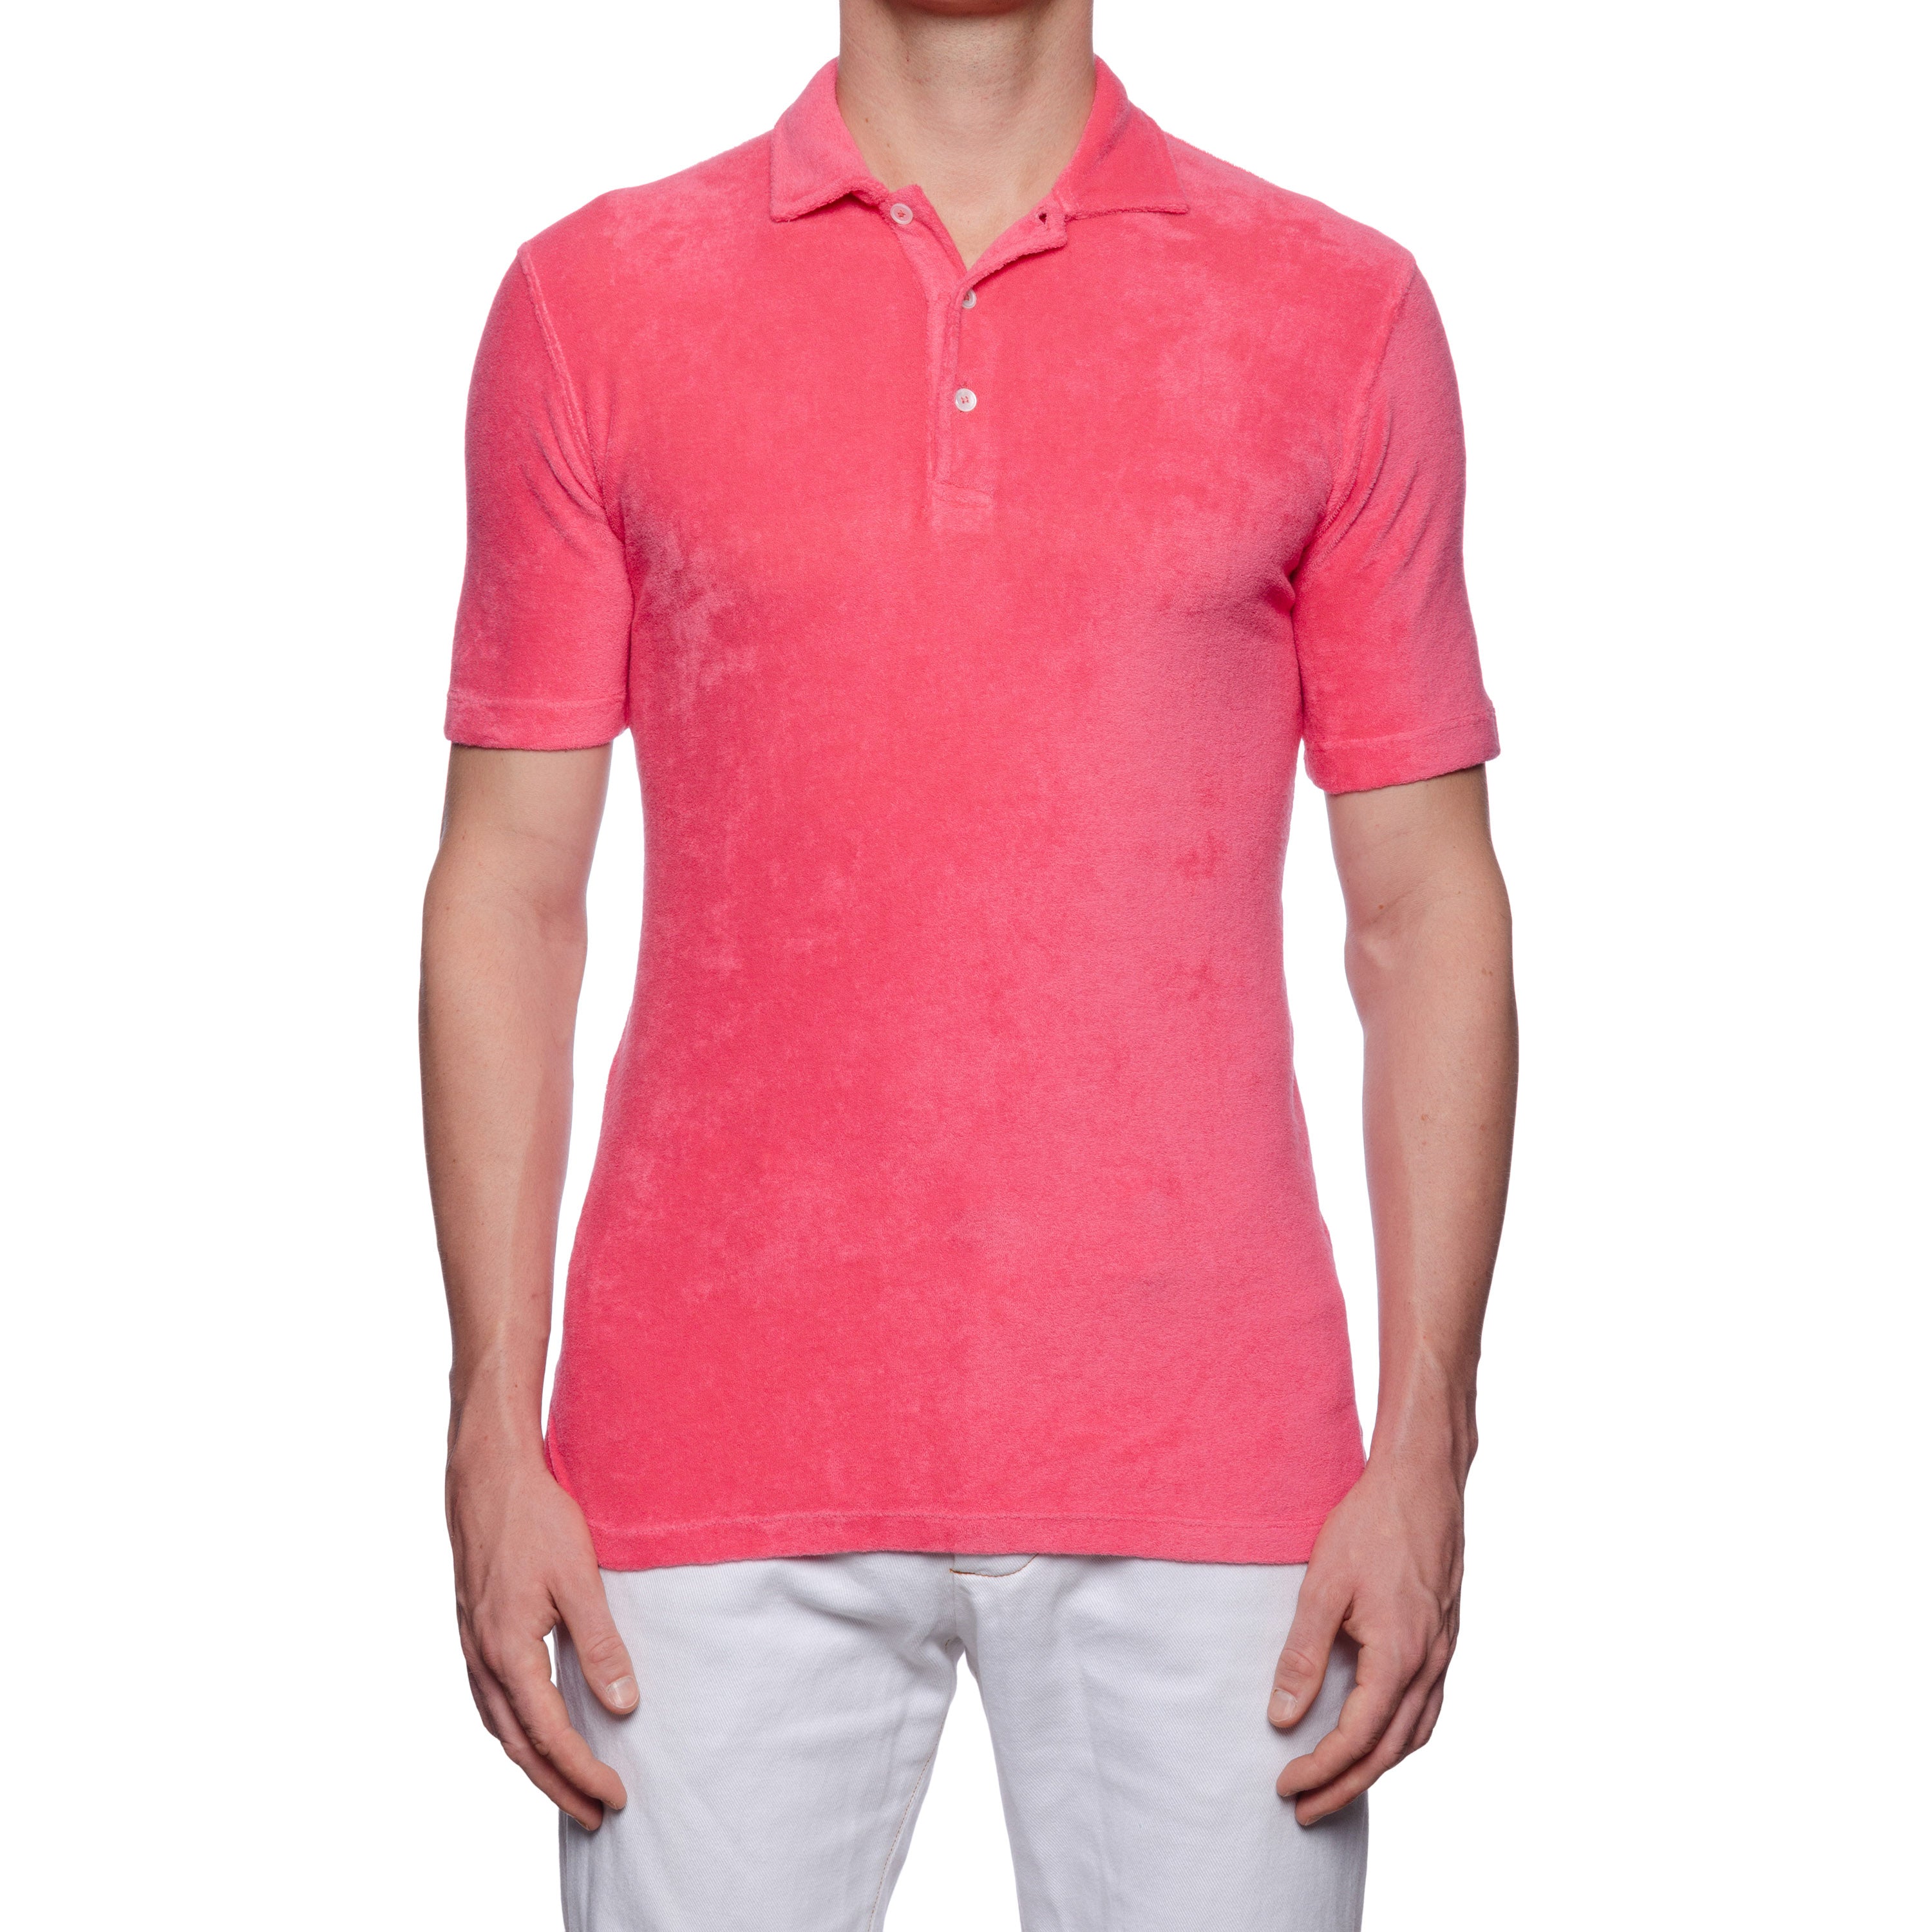 FEDELI "Mondial" Pink Terry Cloth Short Sleeve Polo Shirt NEW Slim Fit